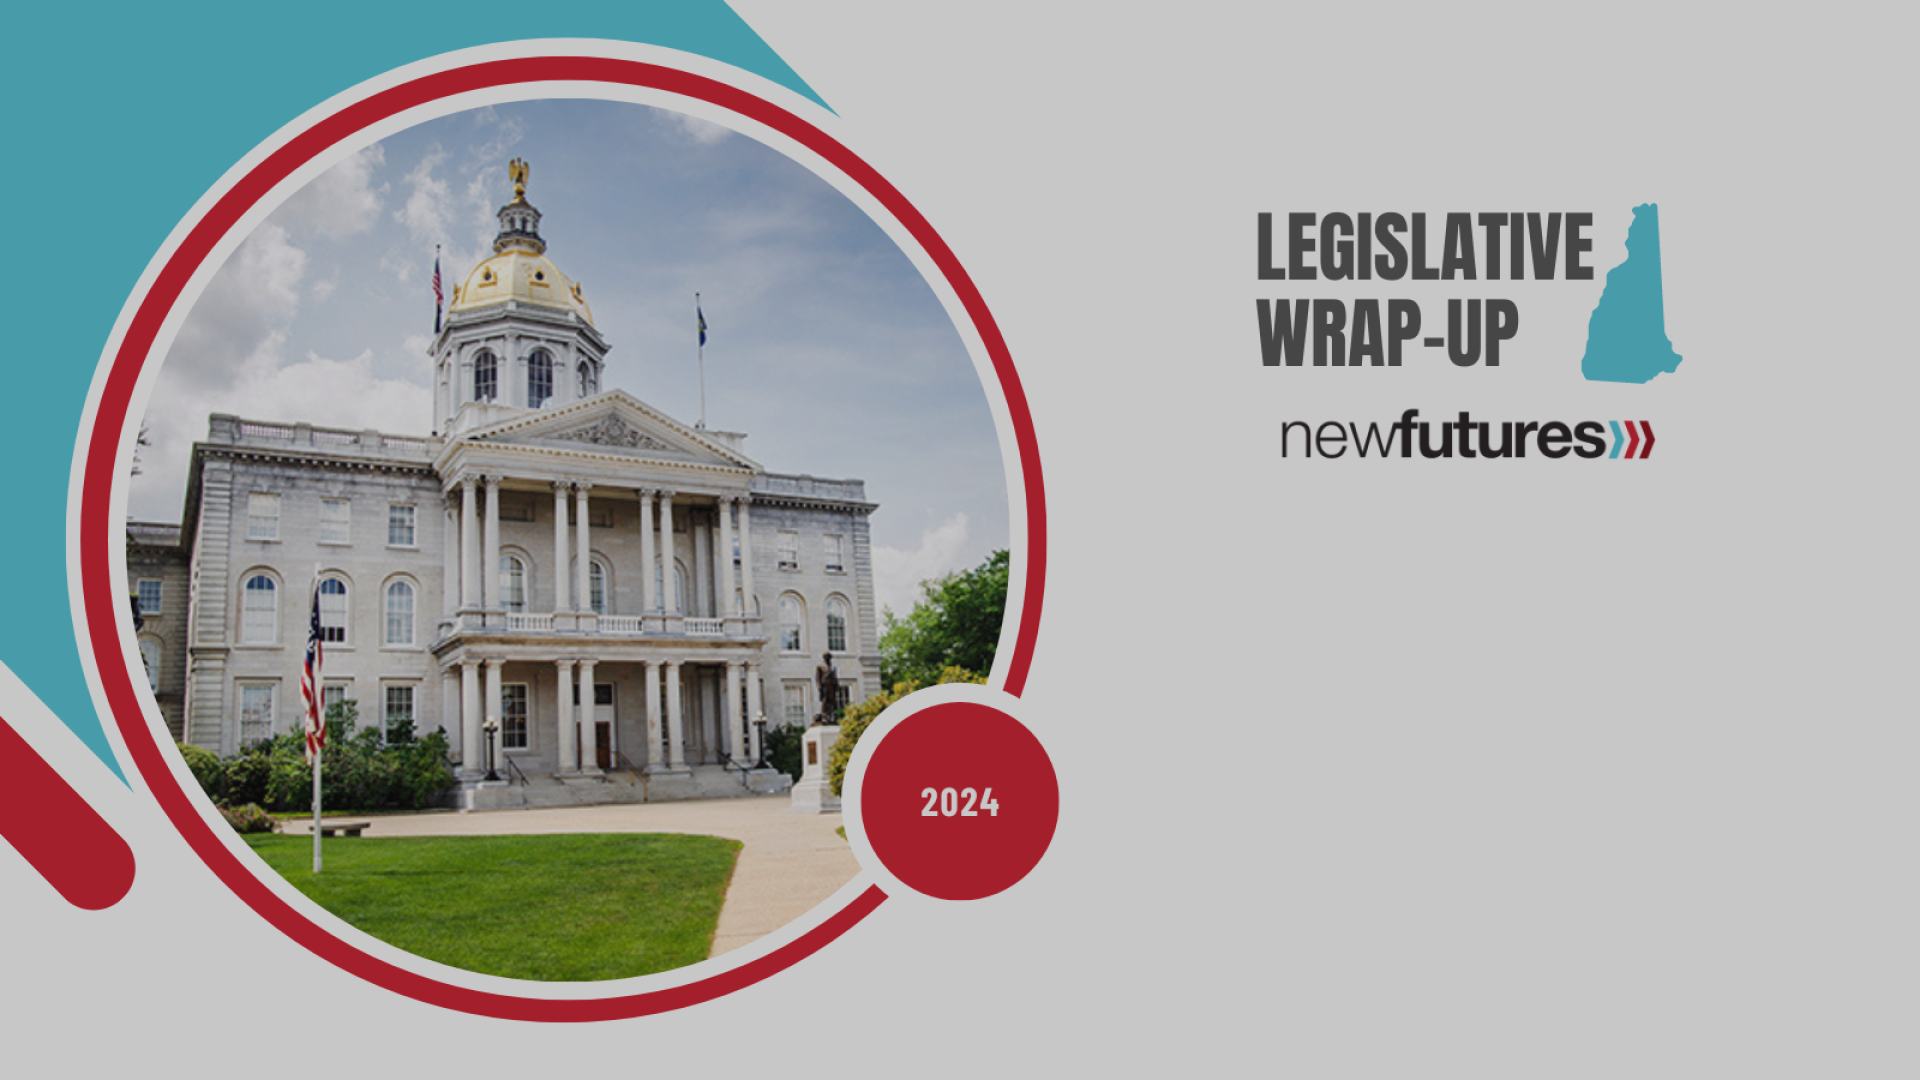 The 2024 legislative session has wrapped up!